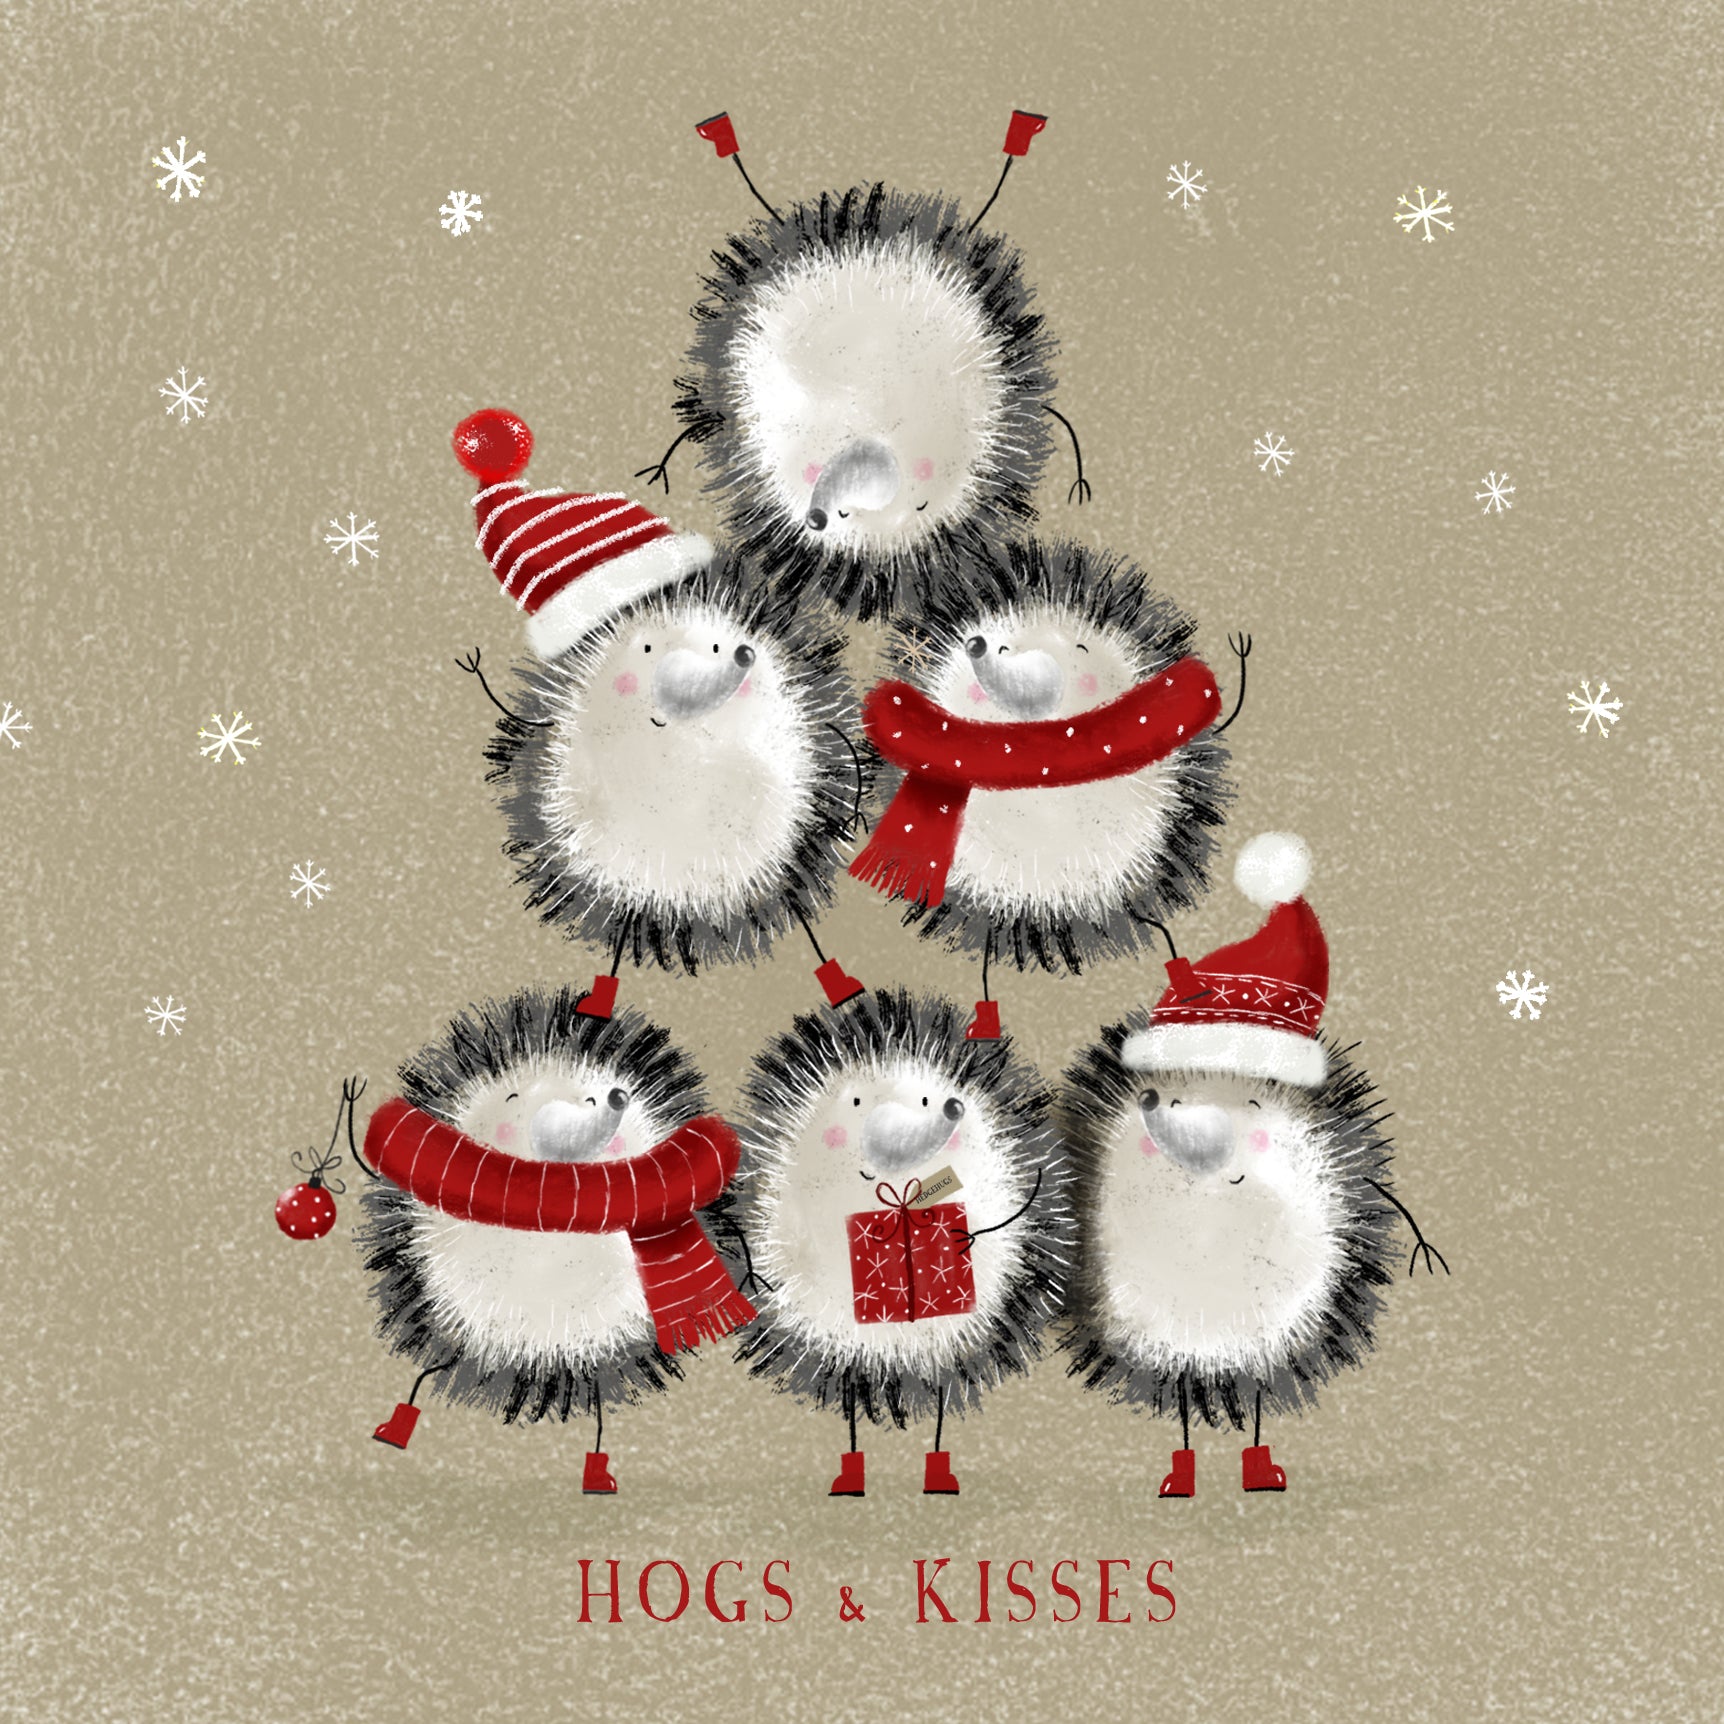 Hogs and Kisses Christmas card features a pyramid of cute hedgehogs in scarves and hats.